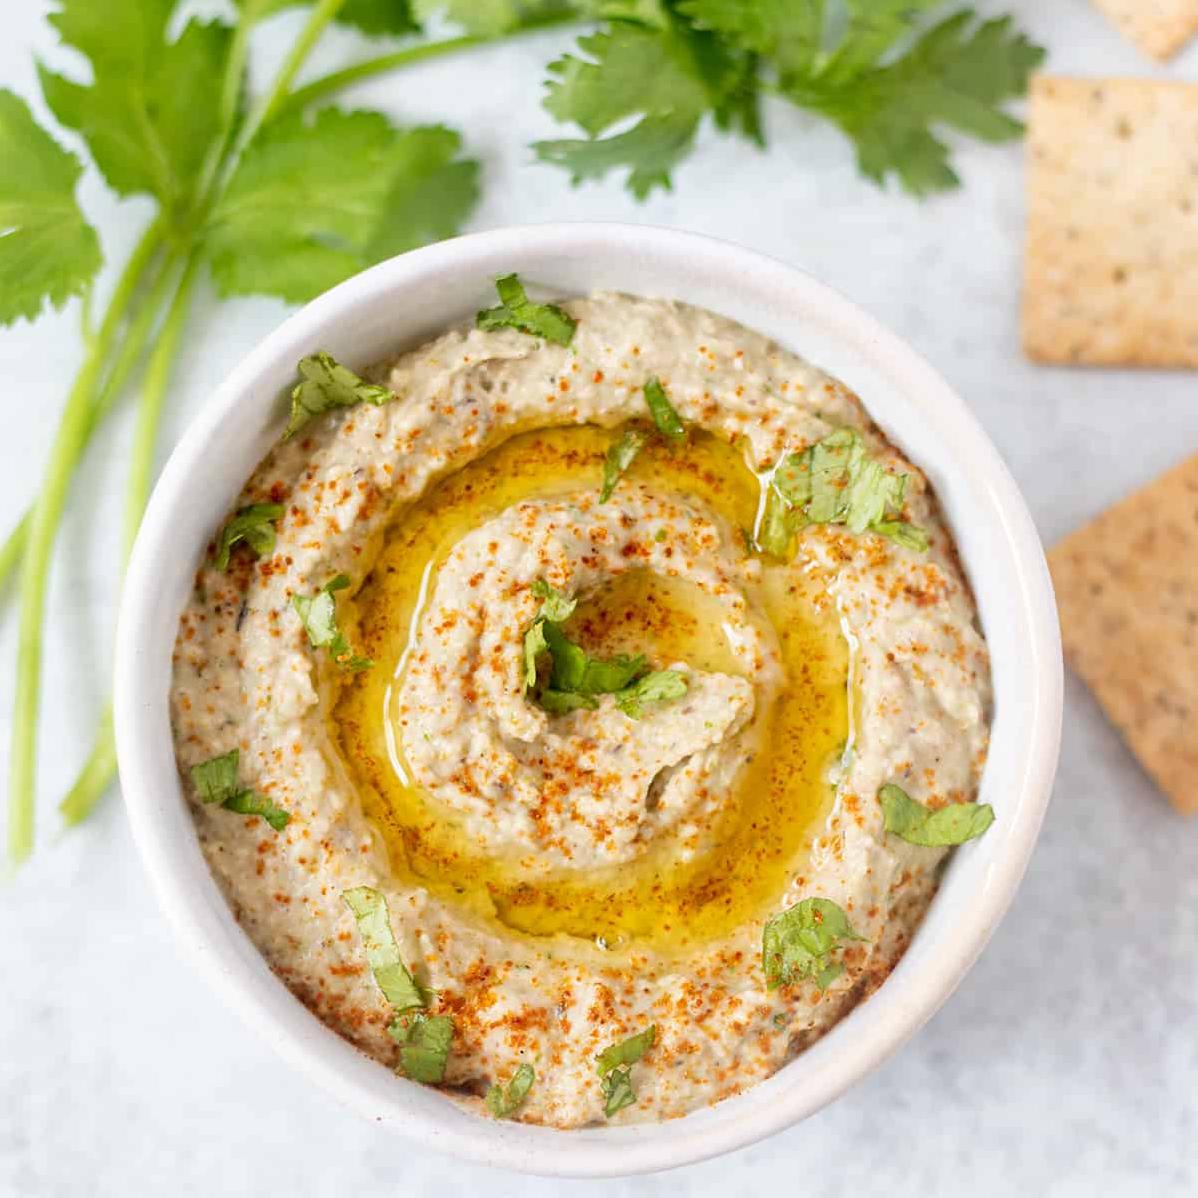  I guarantee this easy-to-make hummus will be the star of your next gathering.